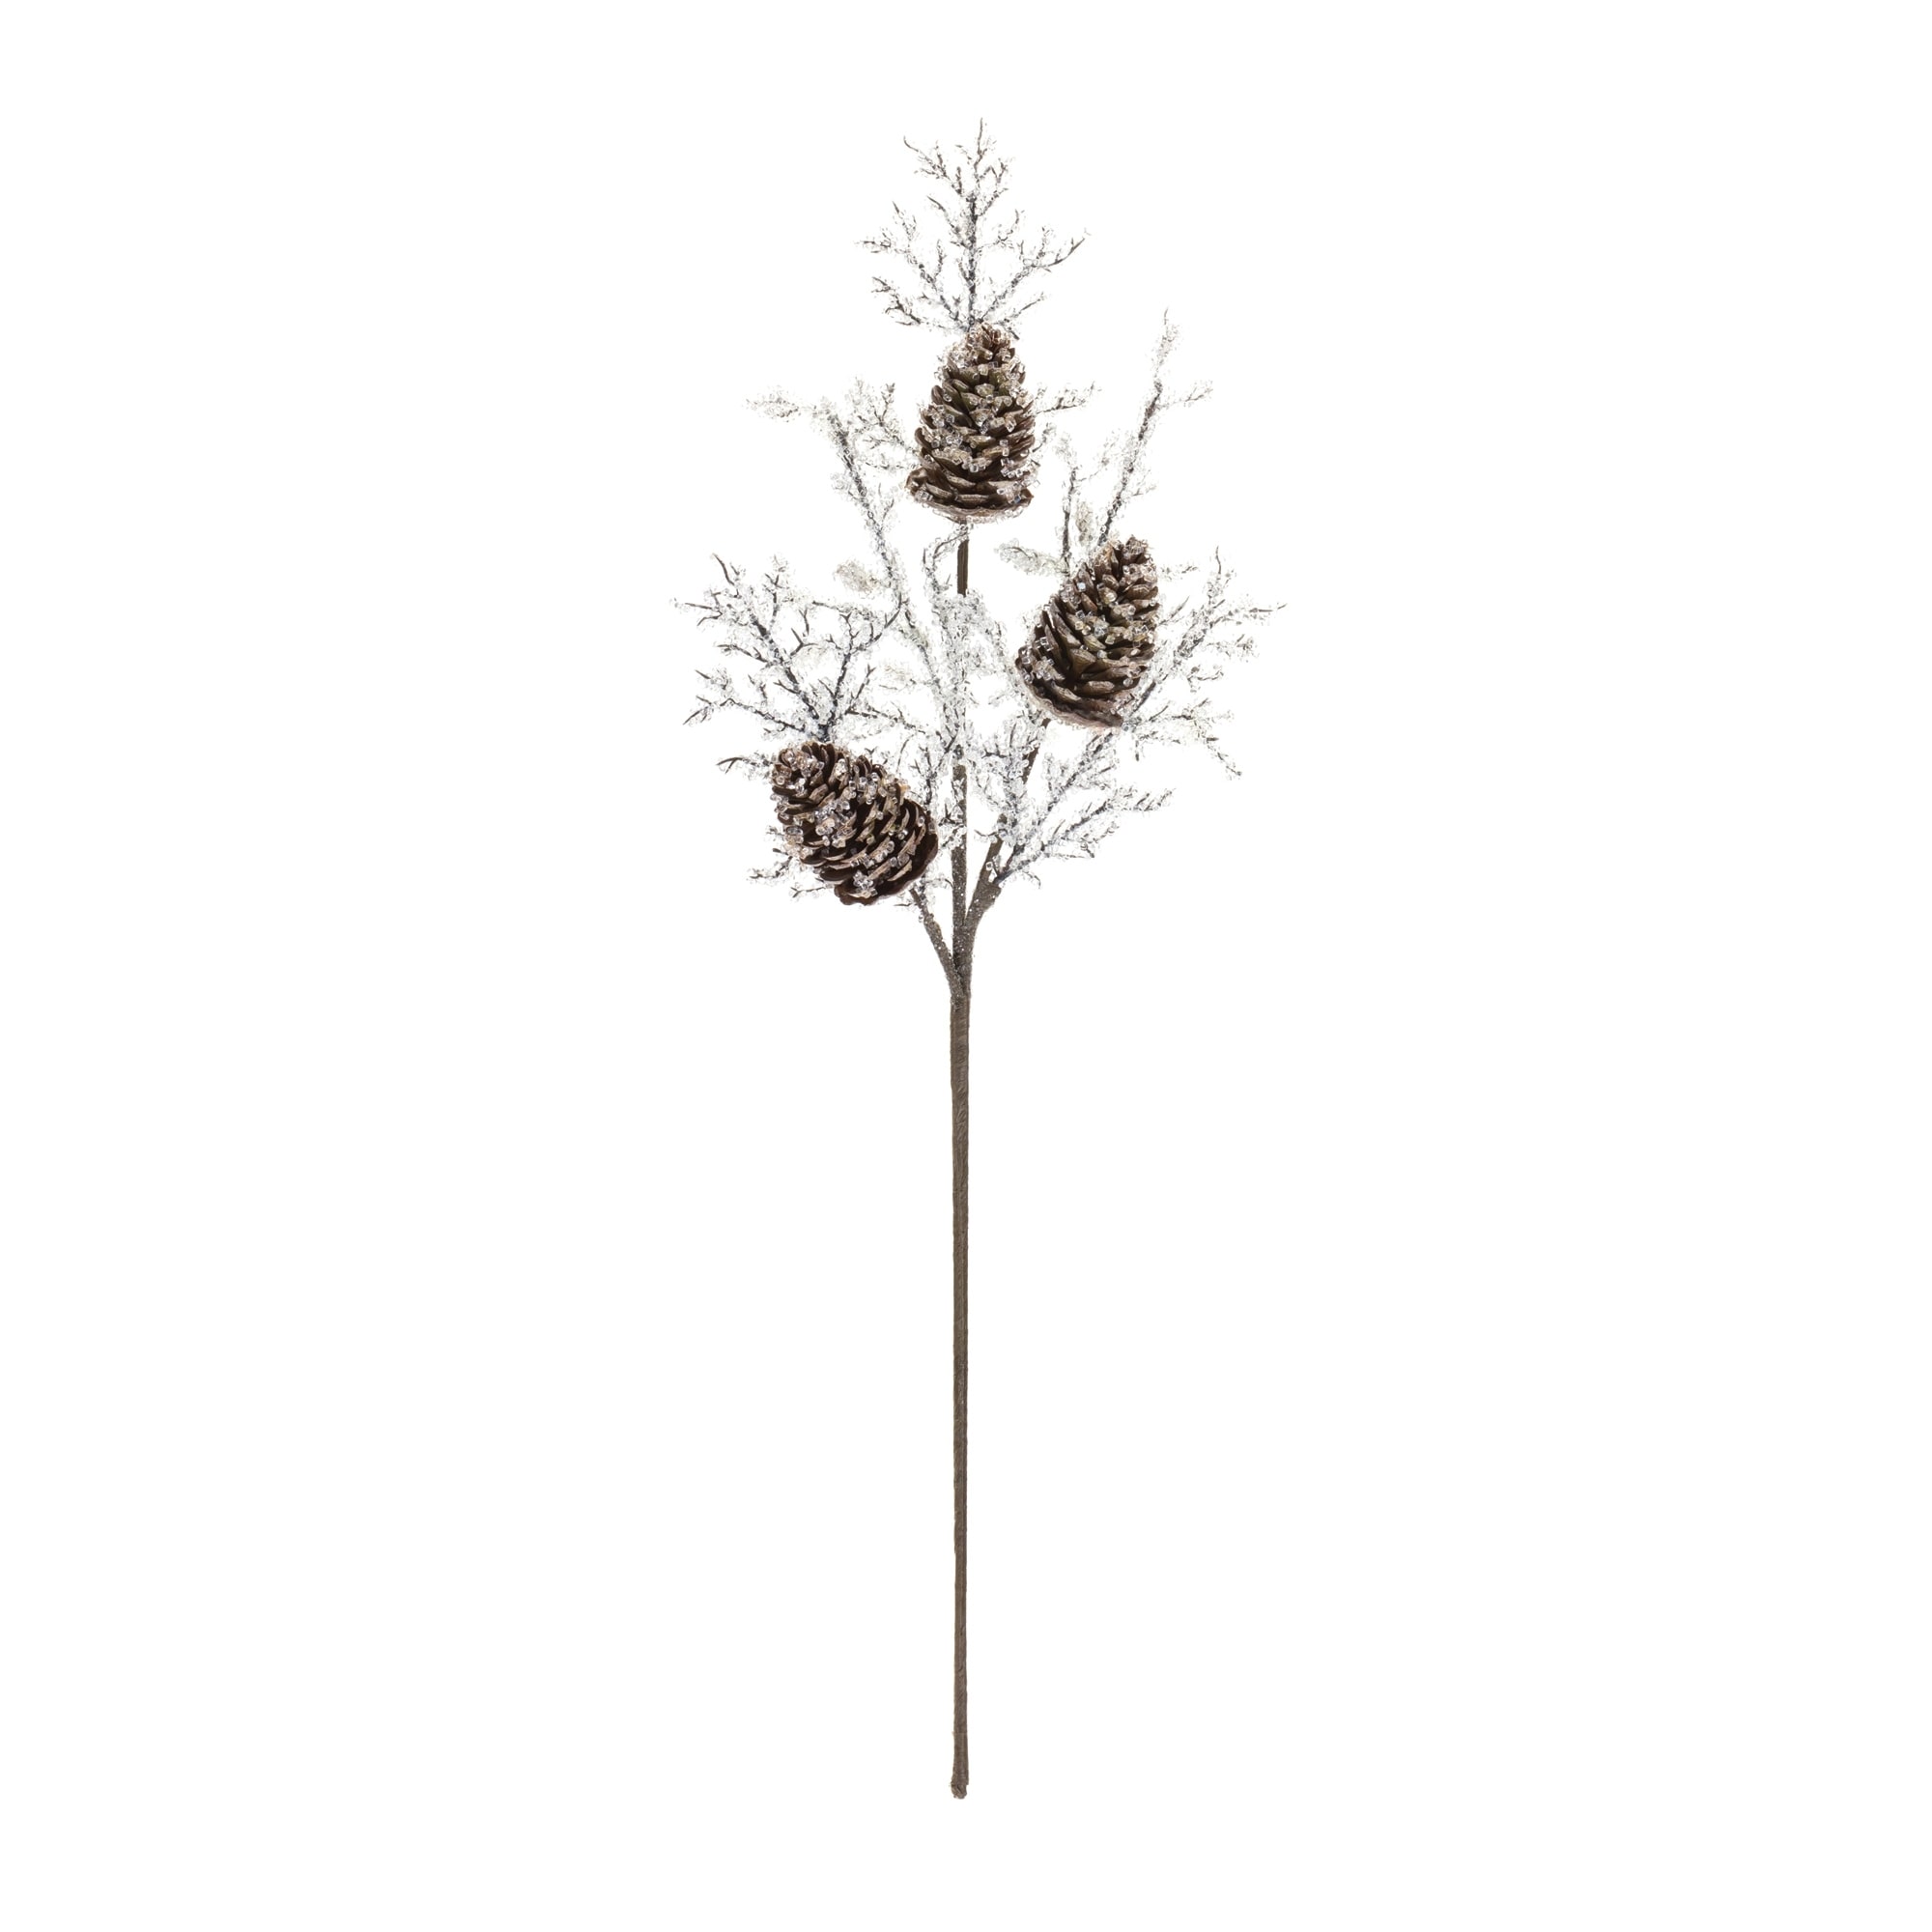 https://ak1.ostkcdn.com/images/products/is/images/direct/73226a71049c99a29db99830d7e8b1724571be70/Iced-Pinecone-Twig-Branch-%28Set-of-2%29.jpg